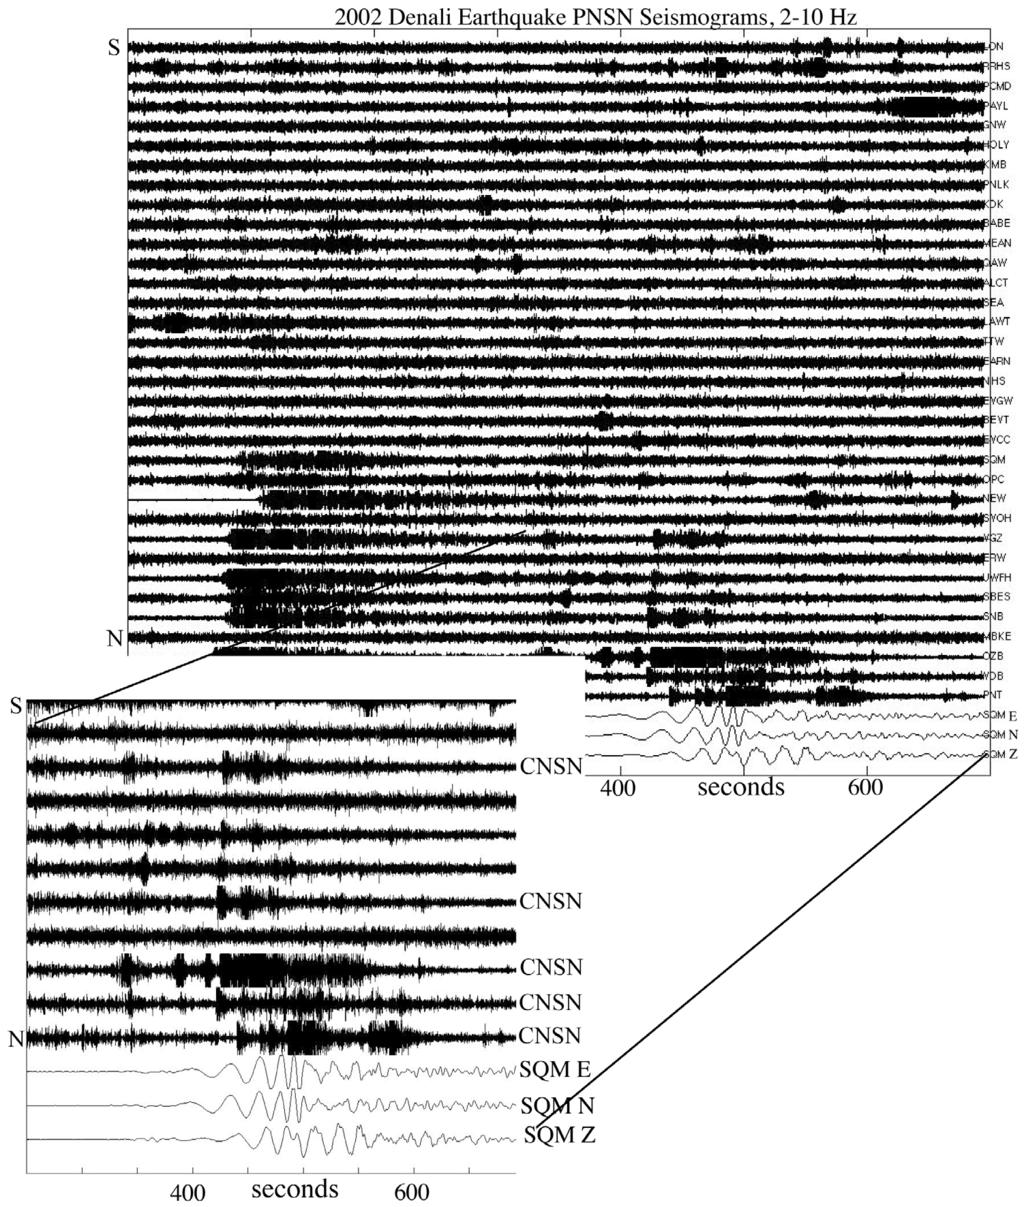 Figure B1. Latitude ordered record section of PNSN seismograms bandpass filtered between 2 10 Hz for the time interval in which waves from the 2002 Denali earthquake (Table 1) traversed the region.